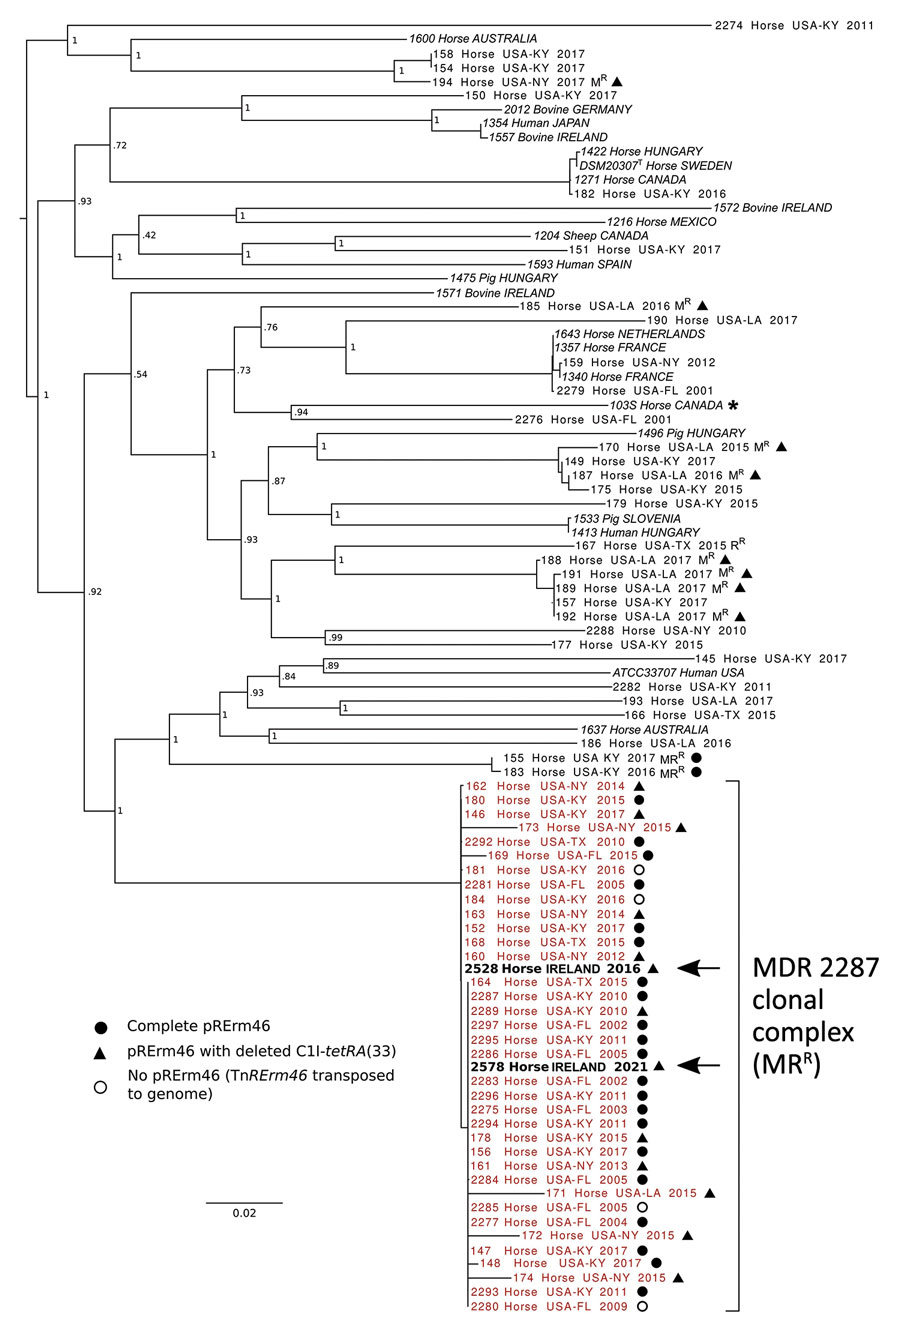 Whole-genome phylogenetic analysis of Rhodococcus equi and its multidrug-resistant 2287 clone. Asterisk indicates strain 103S used as reference genome (GenBank accession no. FN563149). For analysis we used 92 R. equi genome sequences including 68 macrolide-resistant and -susceptible equine isolates from the United States and 22 global strains from a previously reported R. equi diversity set (14) (italics). Macrolide-resistant isolates include 36 members of the MDR-RE 2287 clonal complex (red text) as well as isolates representing spillages of the pRErm46 plasmid to other R. equi genotypes (8,10). Arrows indicate the 2 MDR-RE 2287 isolates from Ireland. Labels indicate geographic origin, year of isolation, and resistance phenotype when applicable (MRR, macrolide and rifampin resistance; MR, macrolide resistance; RR, rifampin resistance). Symbols indicate pRErm46 carriage in macrolide-resistant isolates, described in the key; open circles indicate MDR-RE isolates where pRErm46 has been lost after transposition of the TnRErm46 element to the host genome (8). Numbers at nodes indicate bootstrap values for 1,000 replicates. Tree was drawn with FigTree (http://tree.bio.ed.ac.uk/software/figtree). 